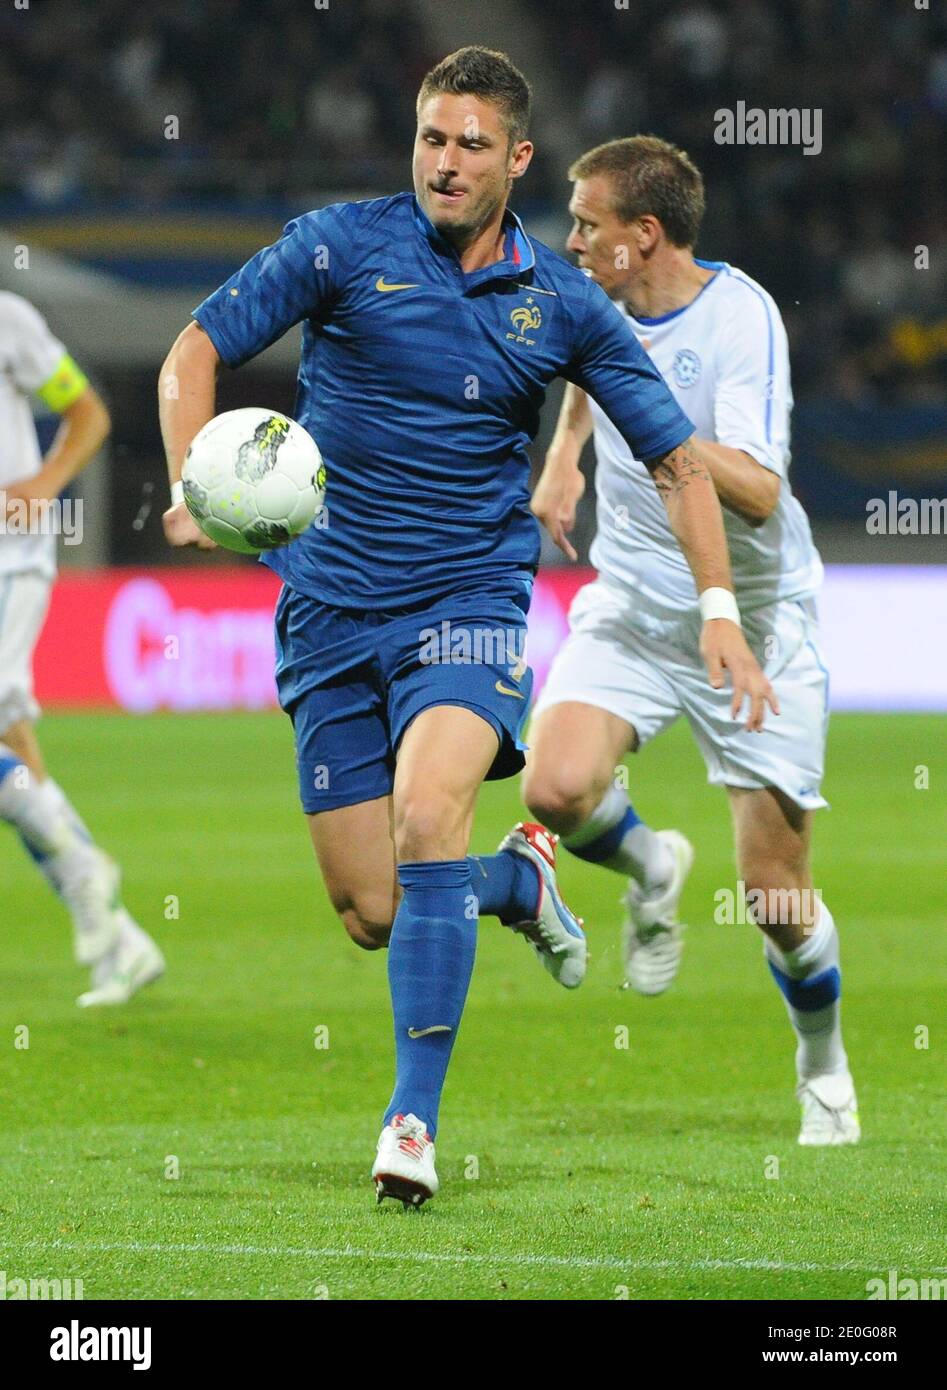 France's Olivier Giroud during an International Friendly soccer match, France Vs Estonia at MMArena stadium in Le Mans, France, on June 5, 2012. France won 4-0. Photo by ABACAPRESS.COM Stock Photo